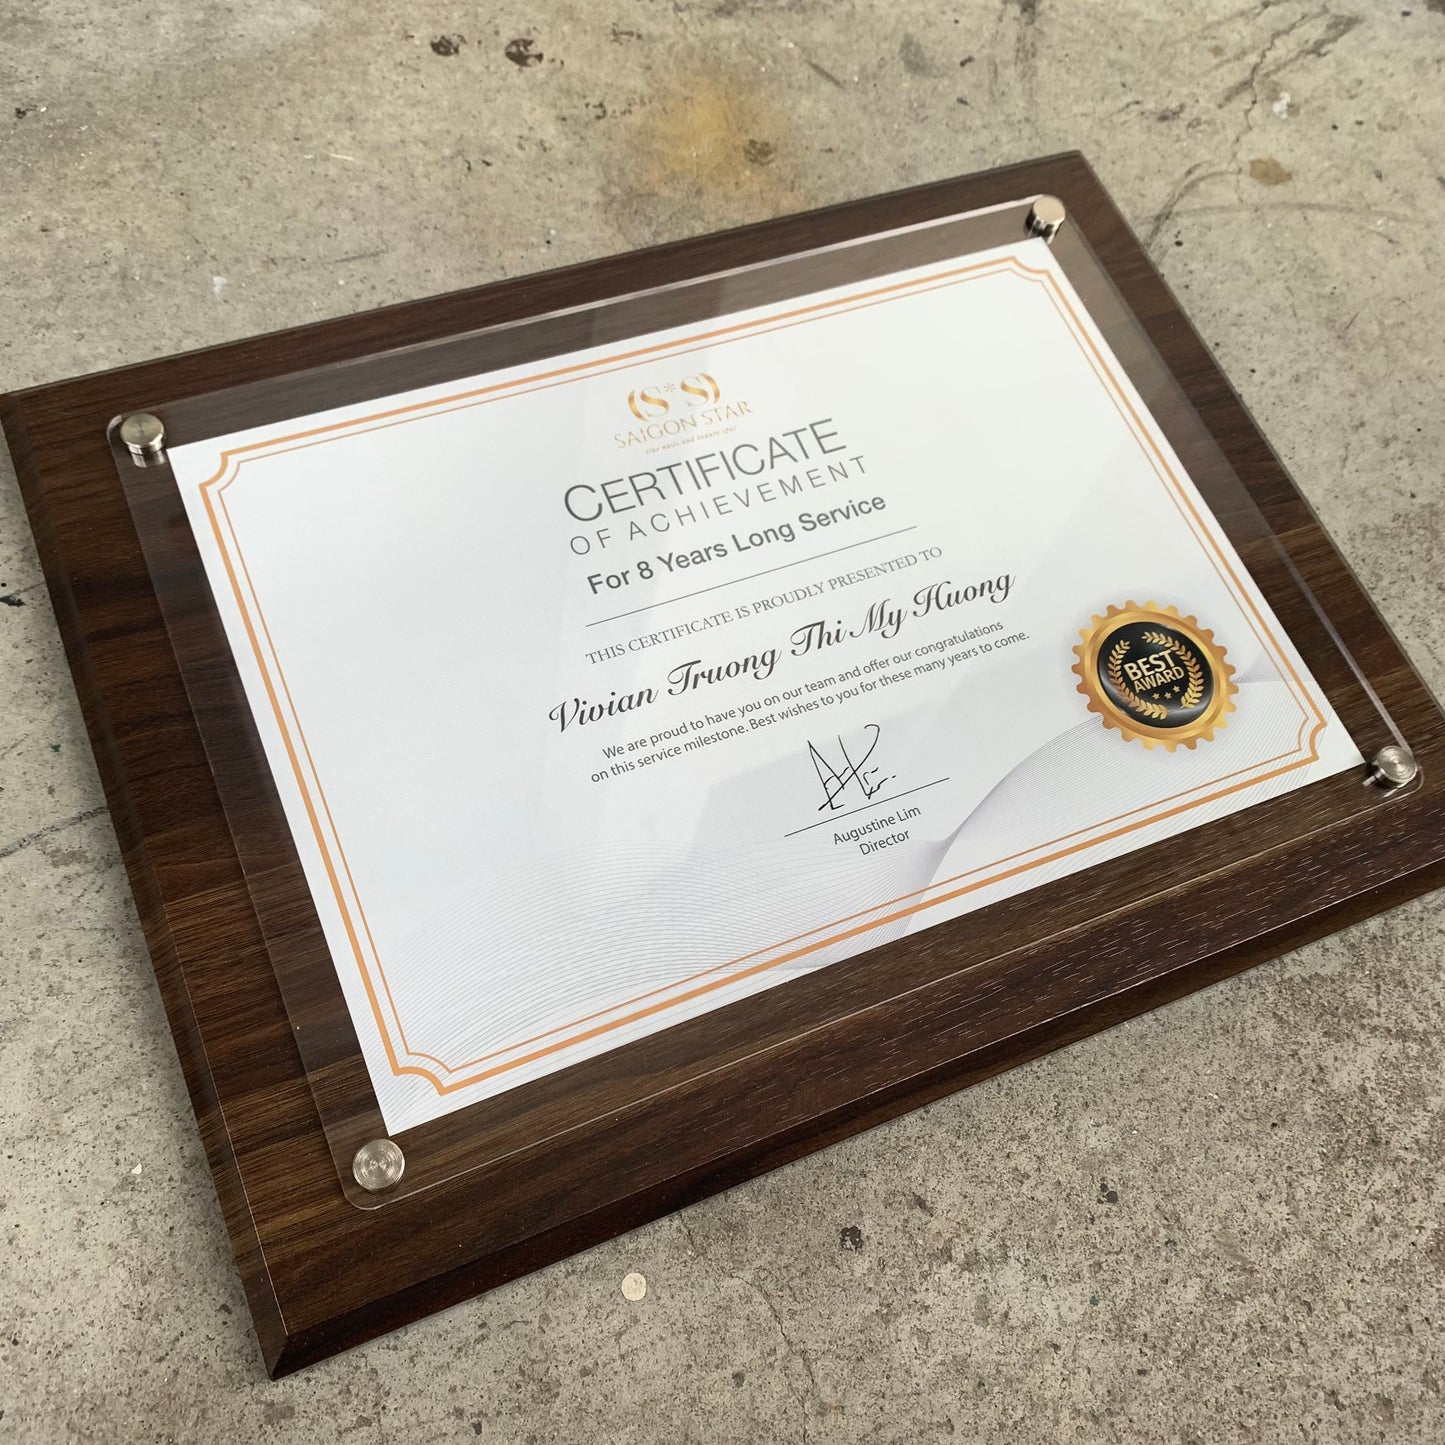 Wooden Plaque with Certificate Print